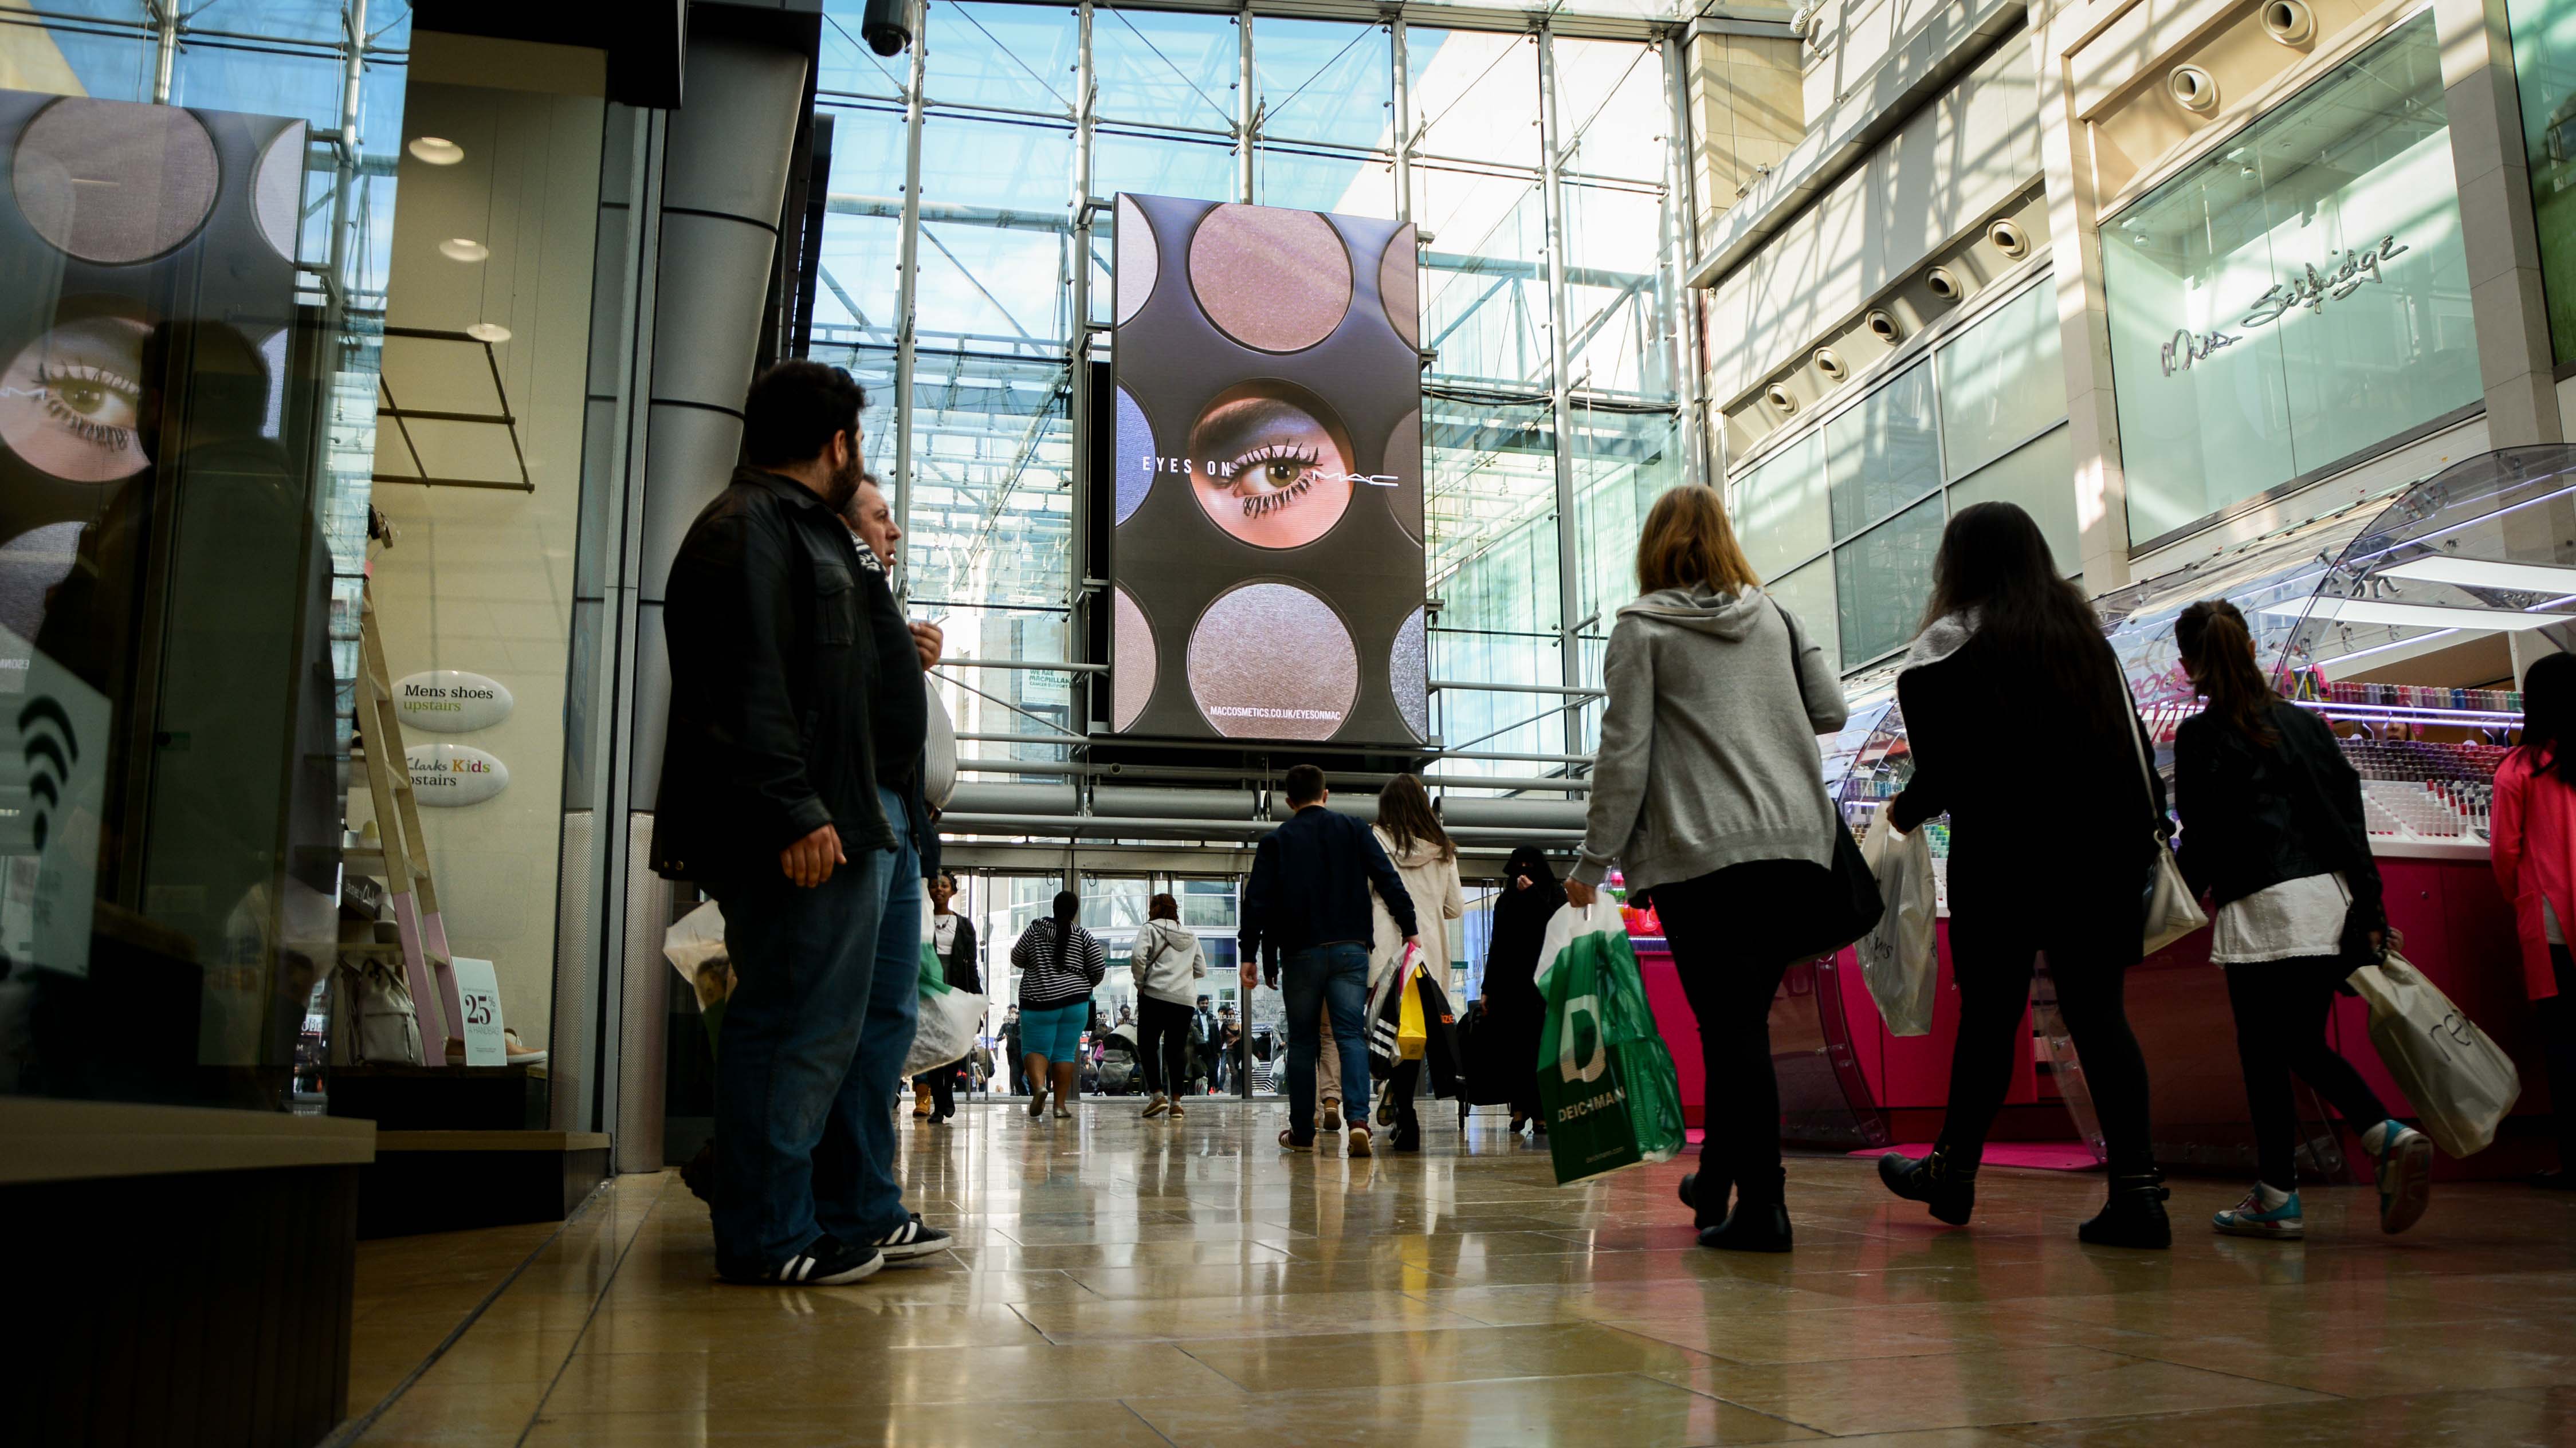 DailyDOOH » Blog Archive » Bullring Shopping Centre Adds More Digital